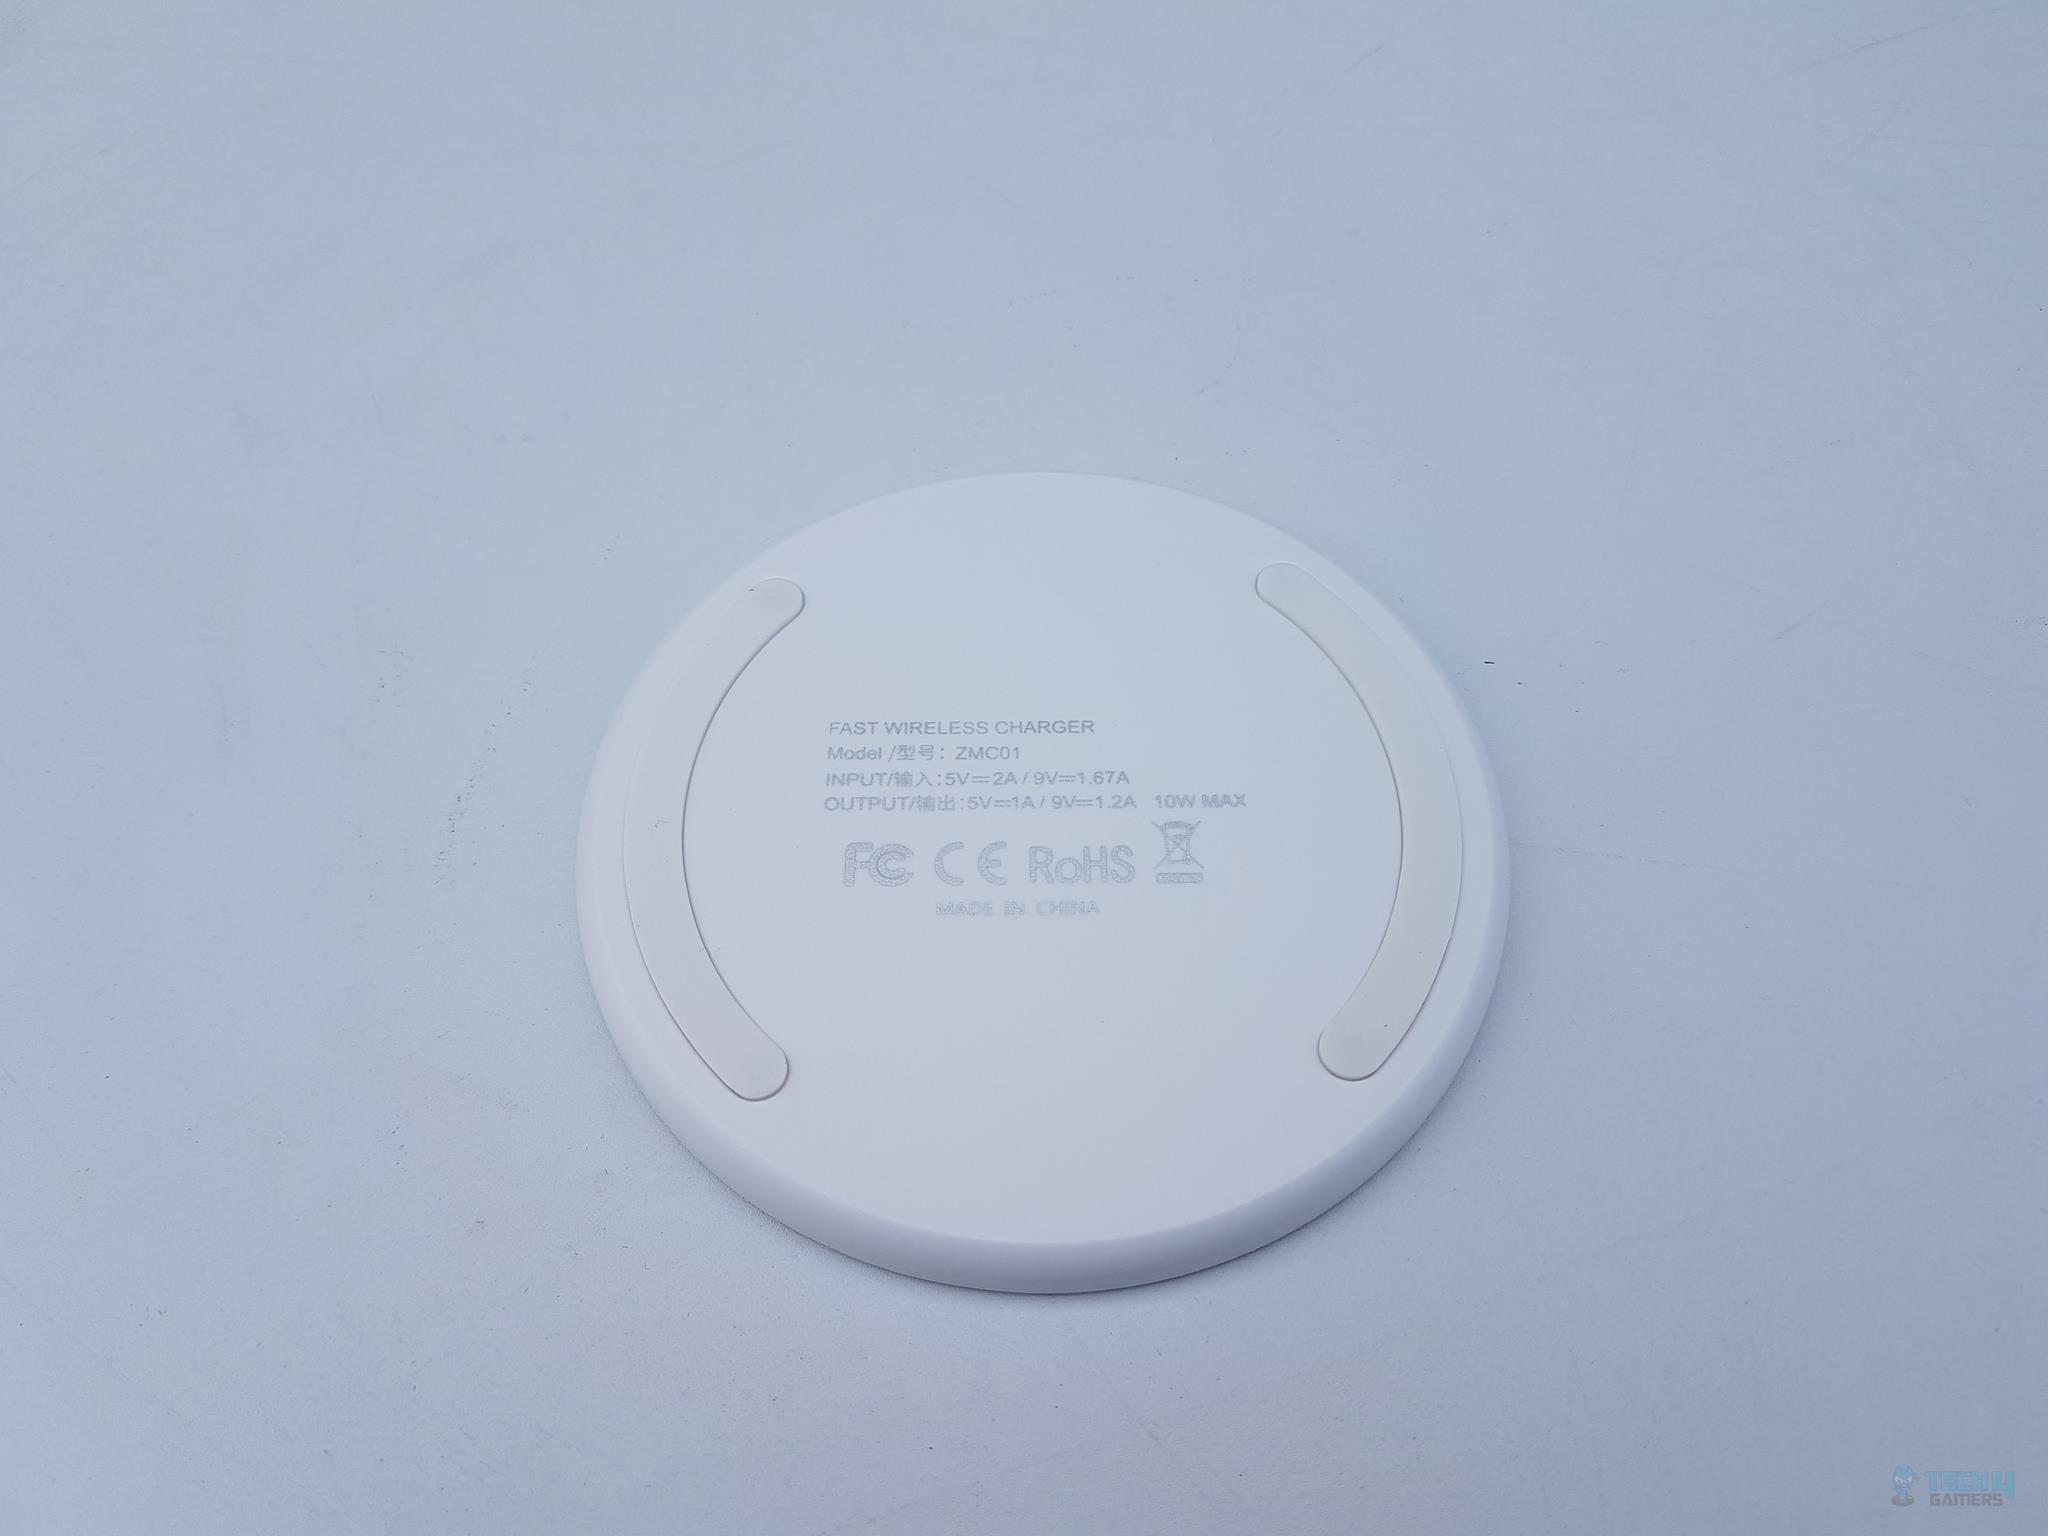 ZMC01 Fast wireless charger Backside Closer Look